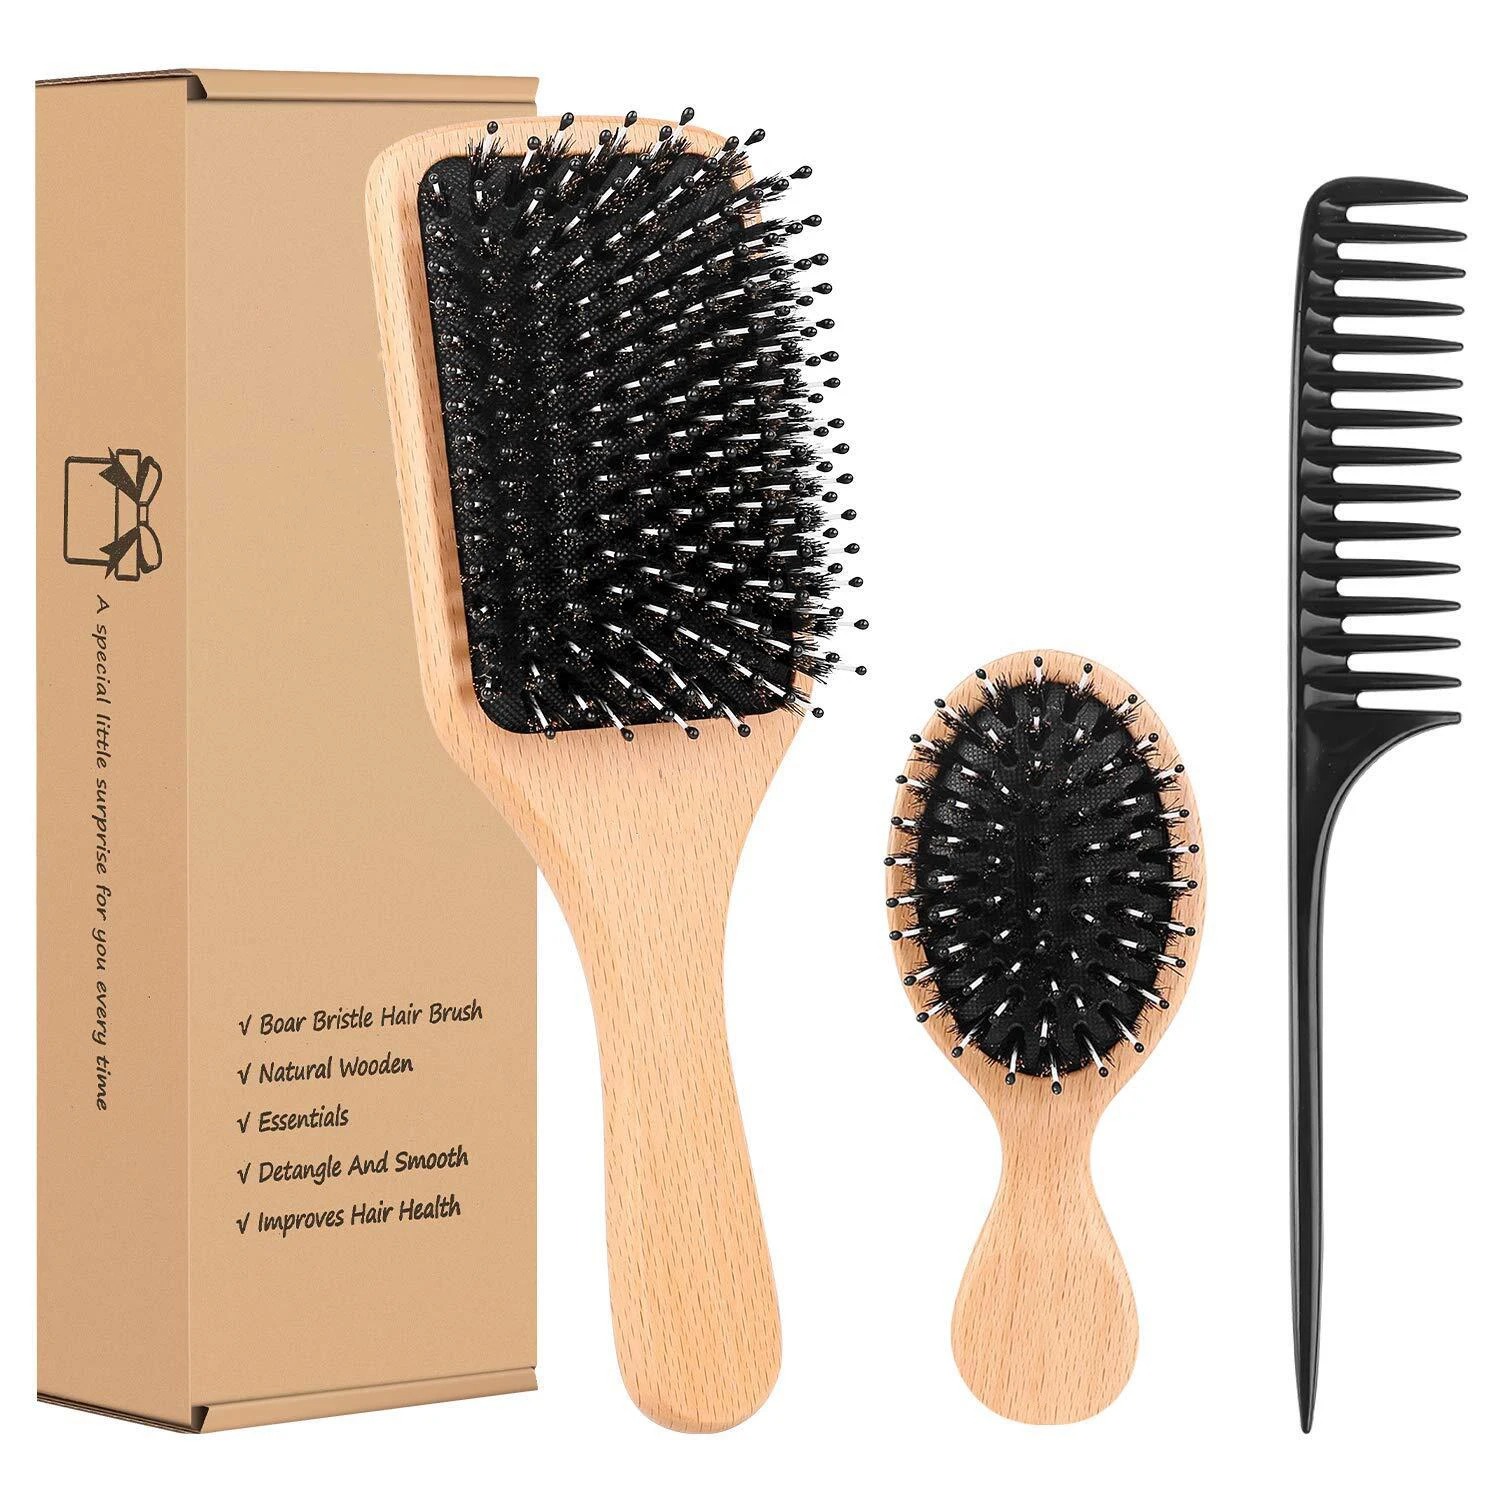 

Hot sale woman hair brushes logo for detangling wooden hair detangling brush, Any colors as per request